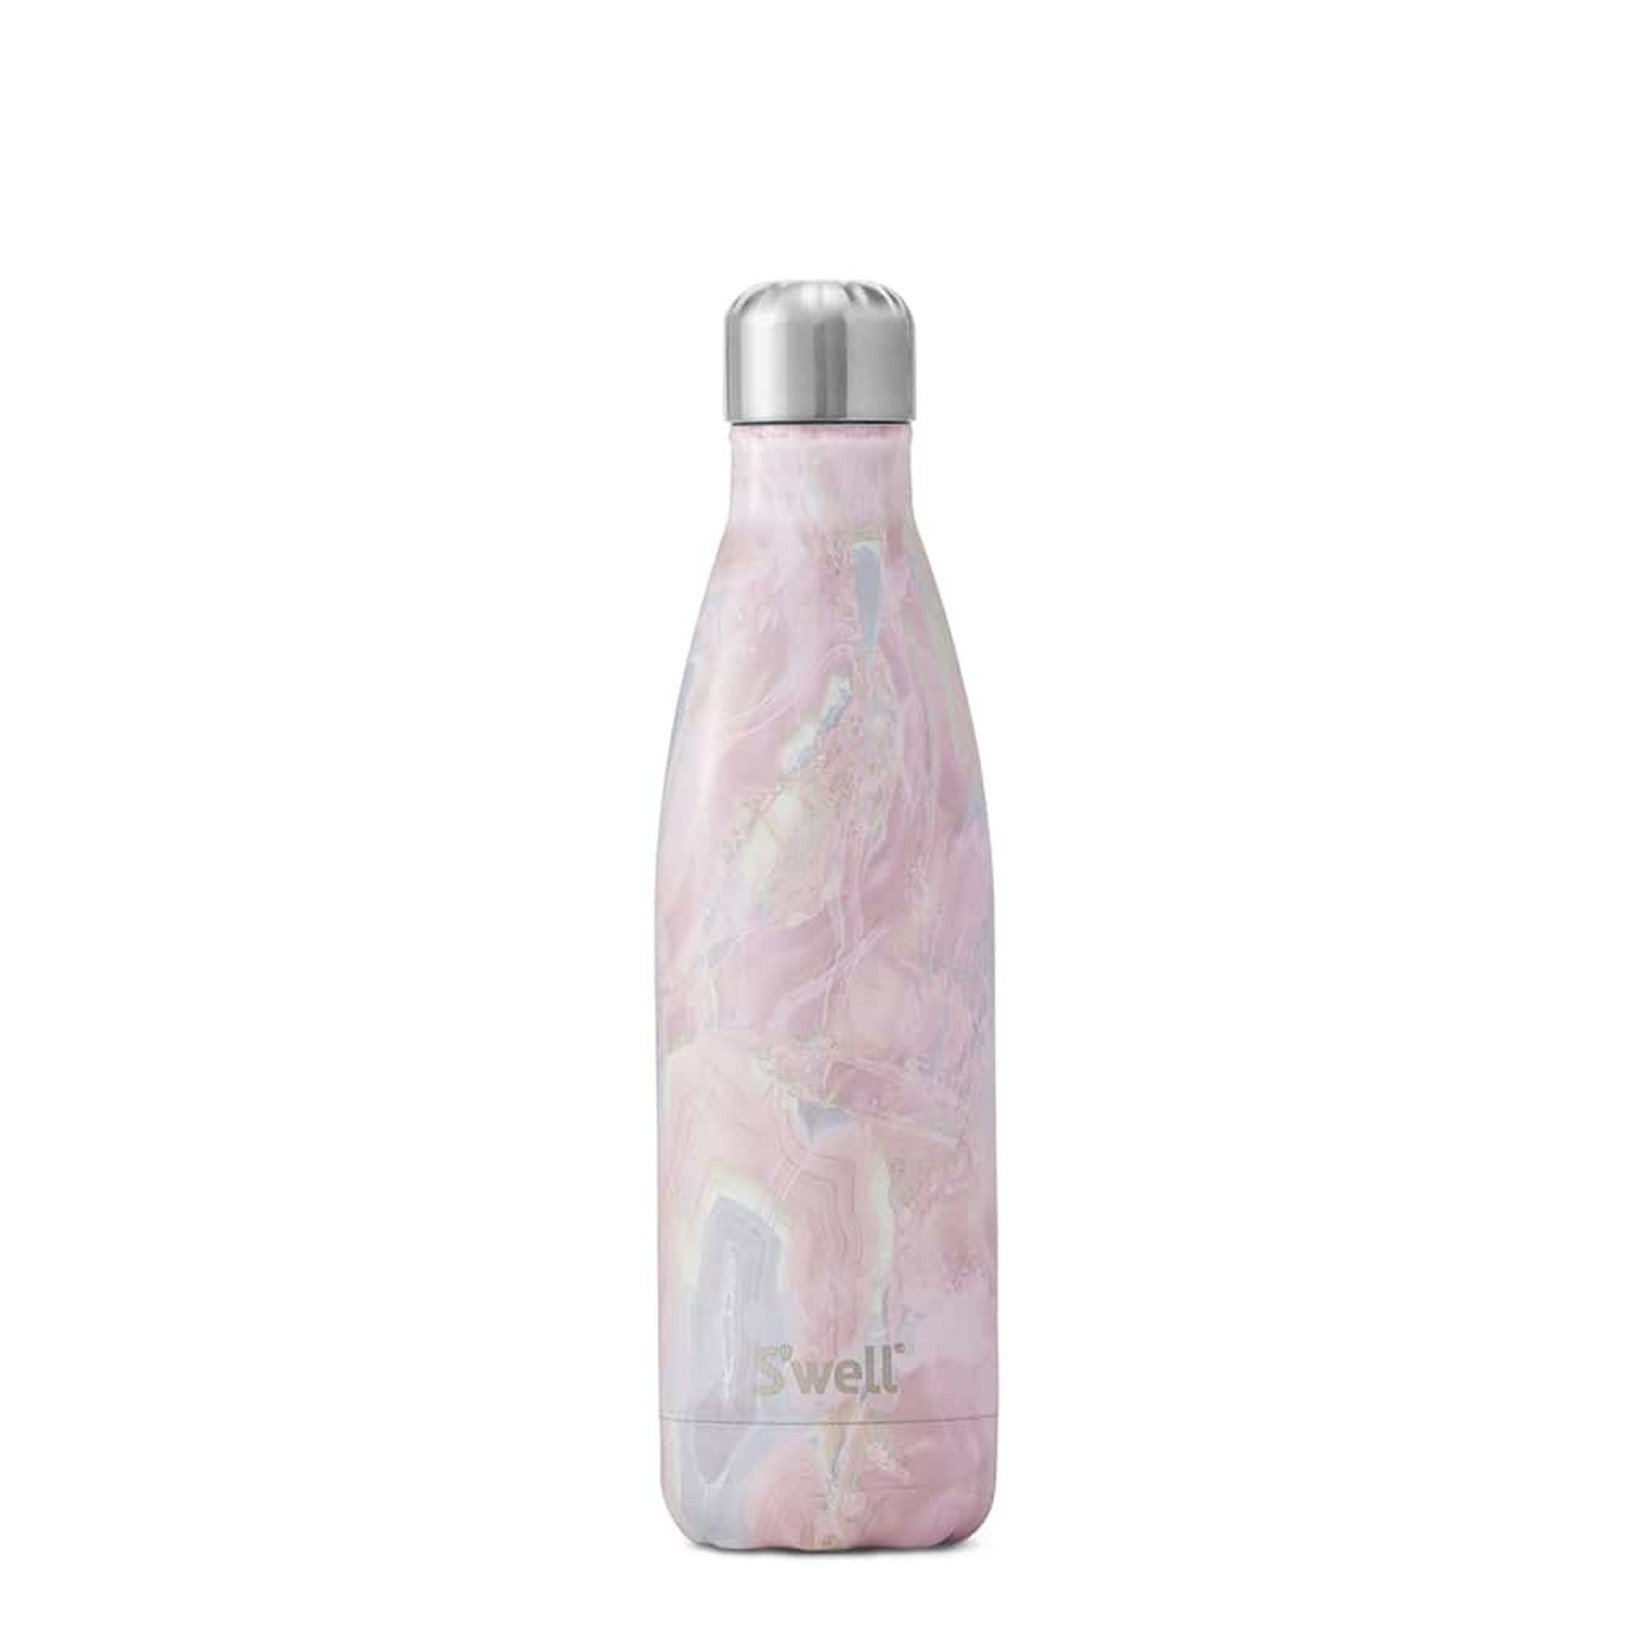 S'well Stainless Steel Water Bottle - Geode Rose